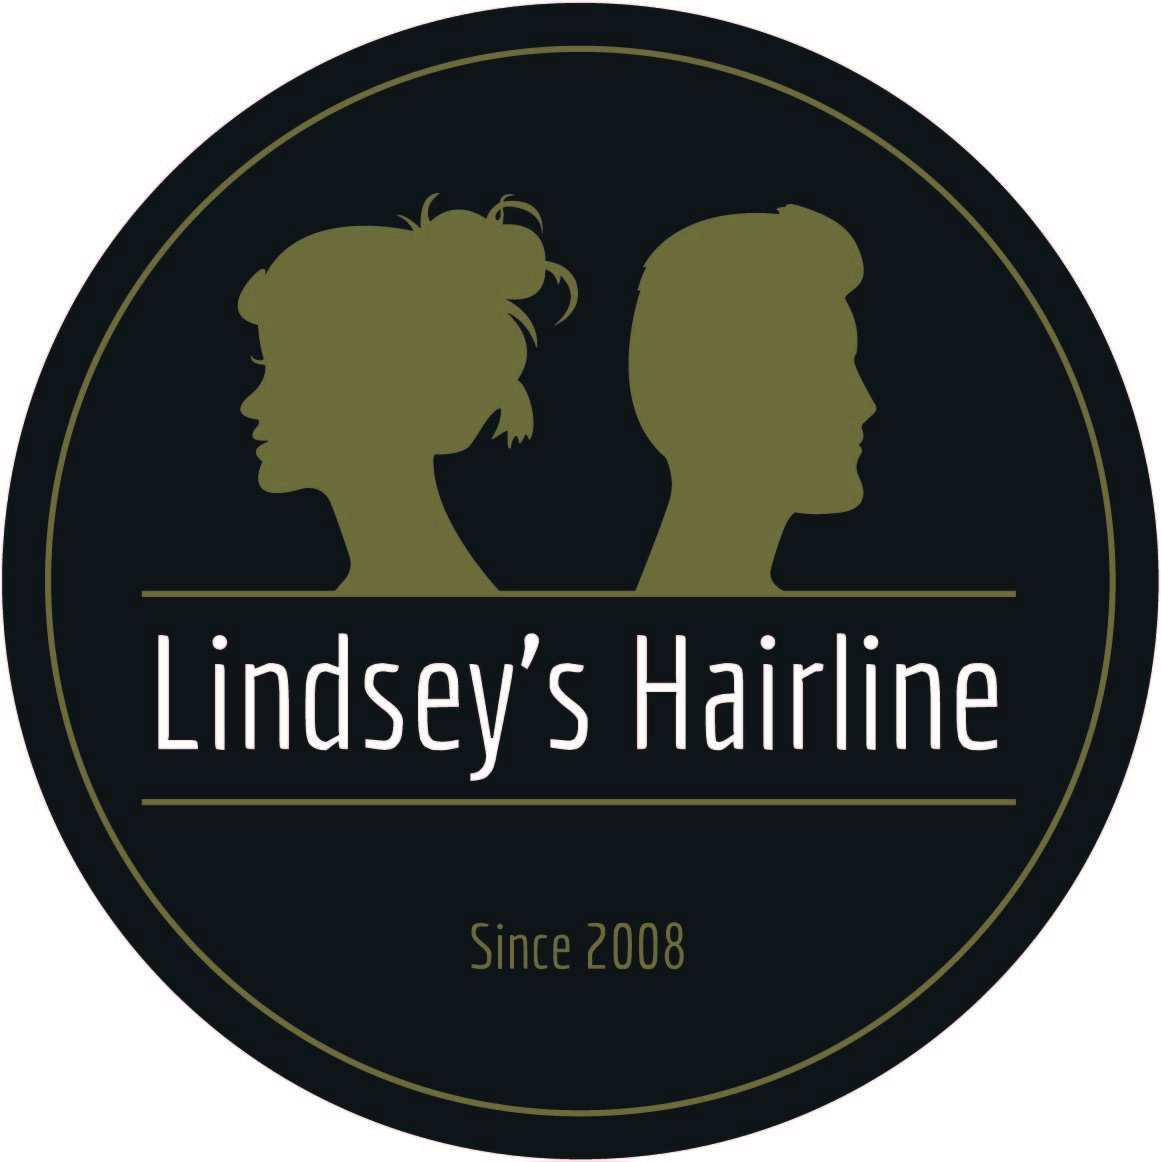 Lindsey's Hairline